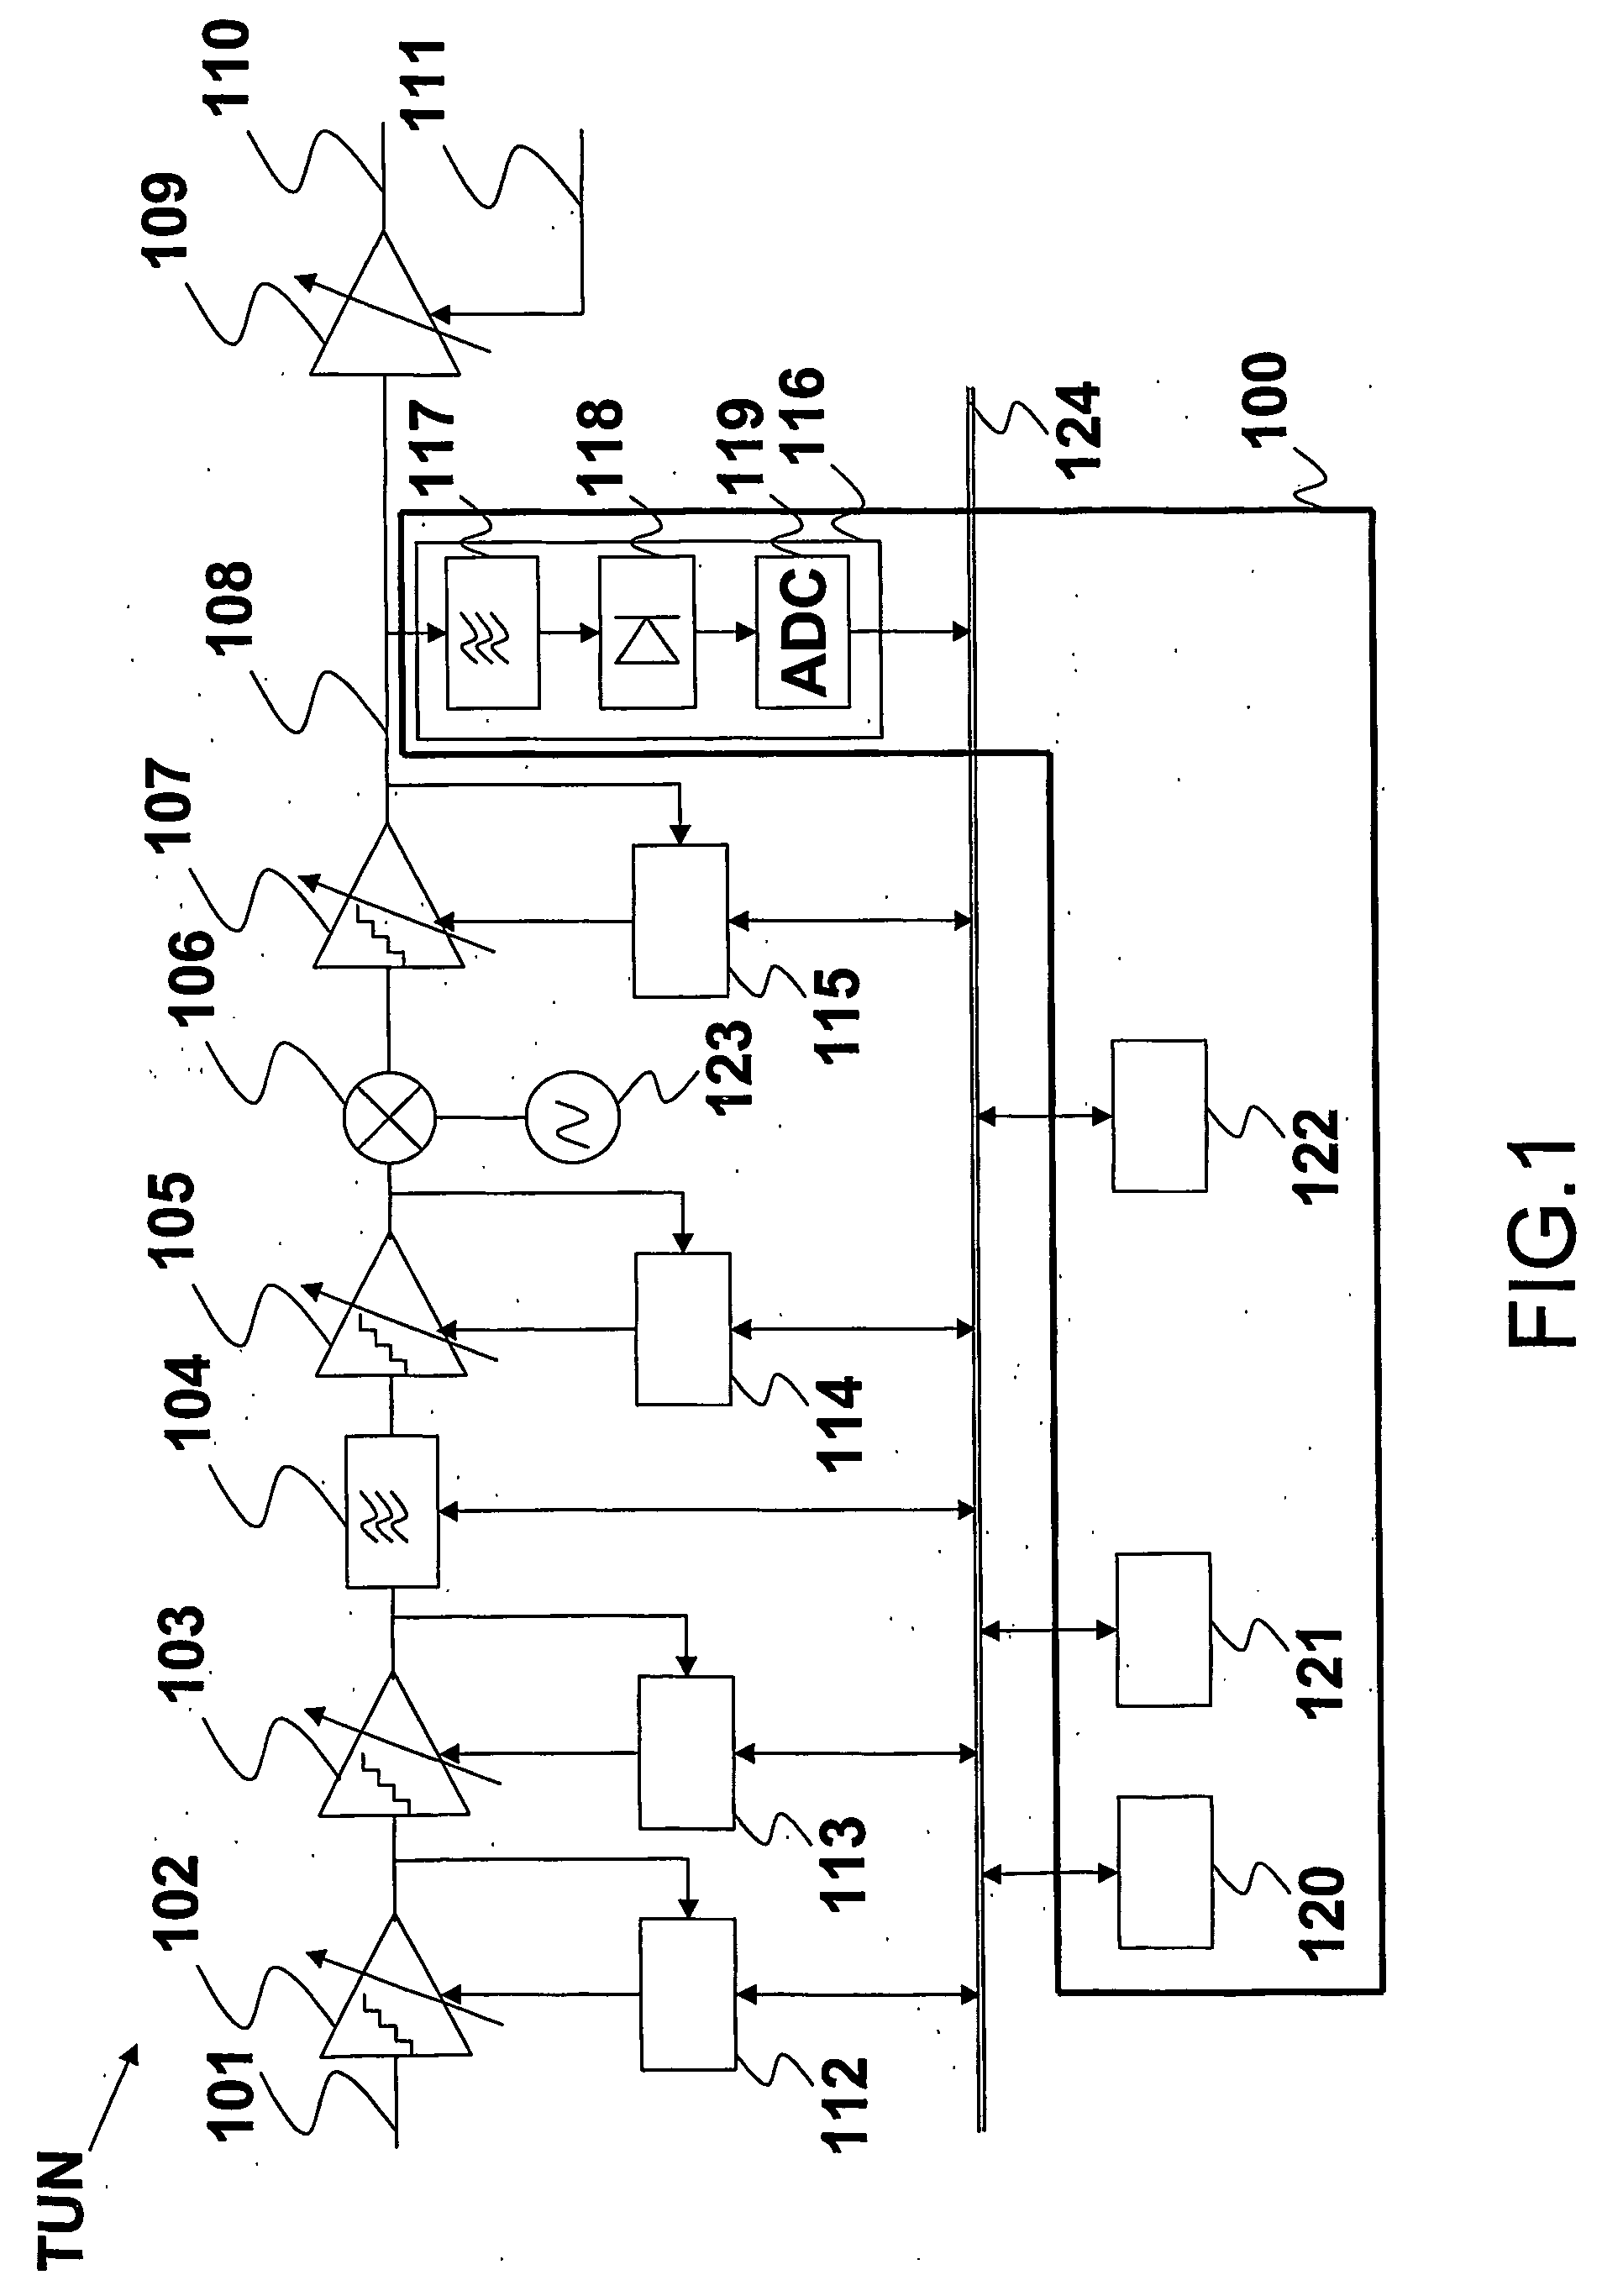 Device and method for determining the level of an input signal intended to be applied to a receiving system